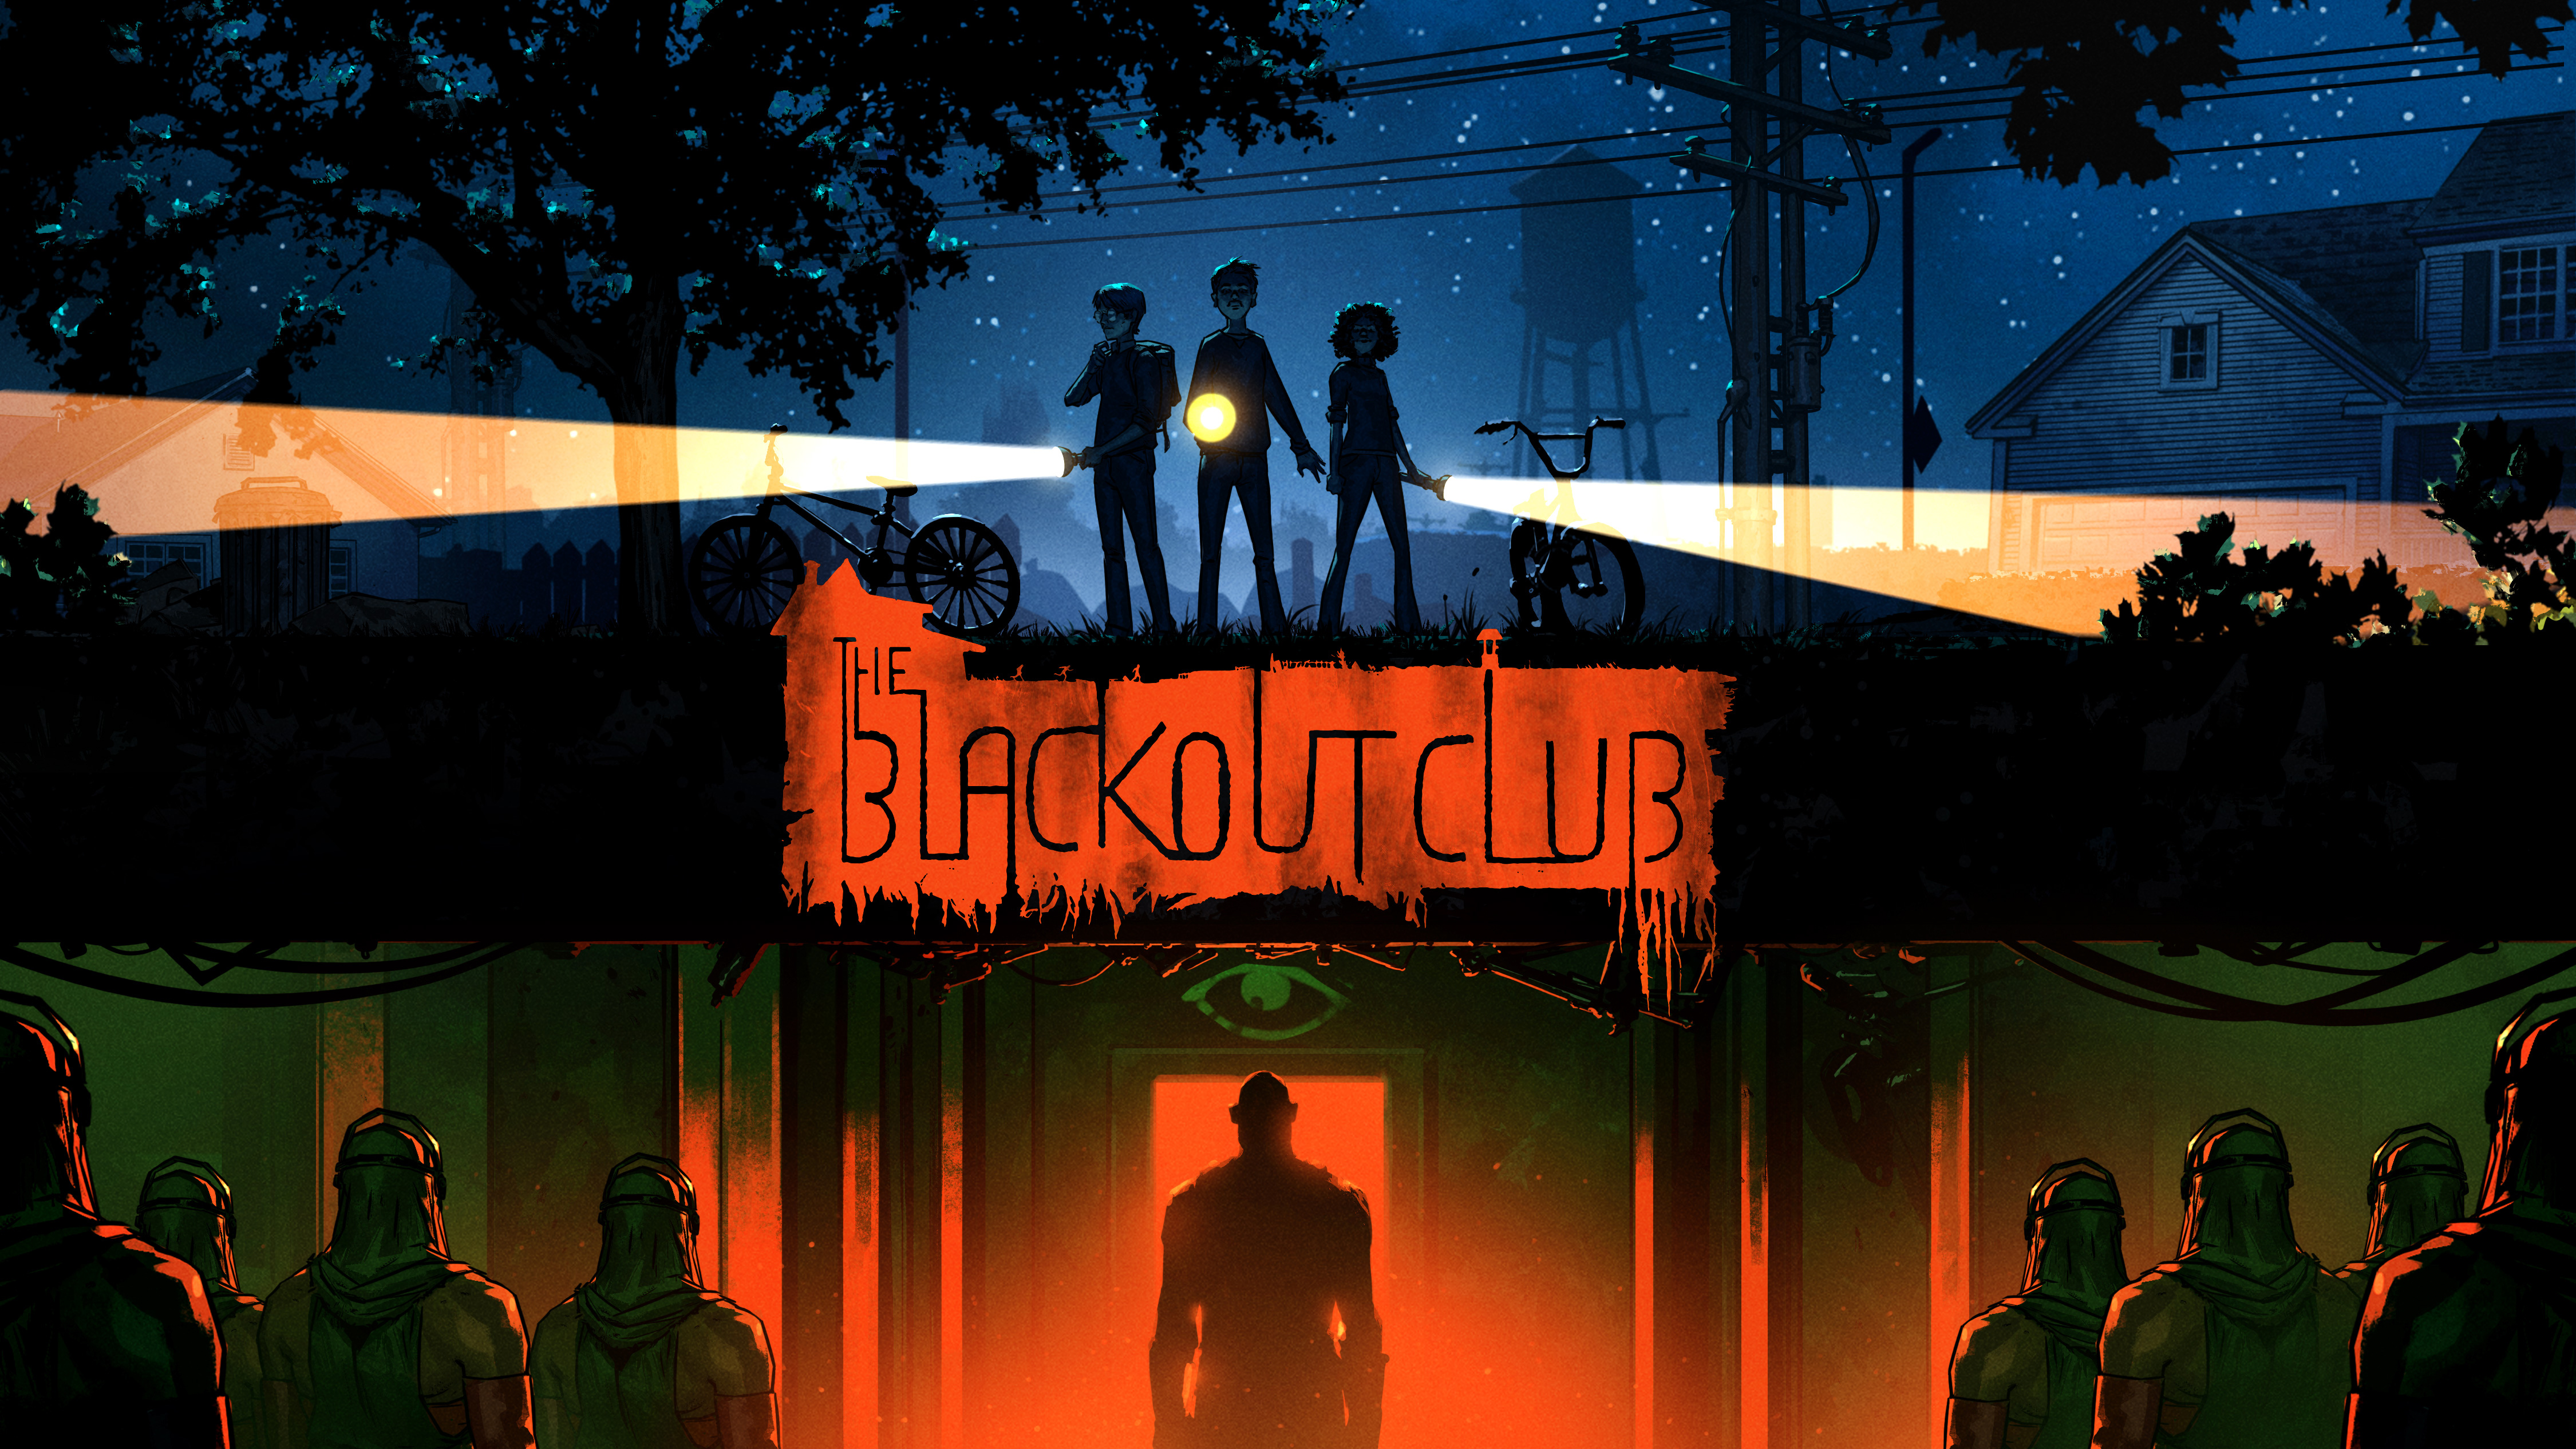 The Blackout Club Horror Game 4K609947982 - The Blackout Club Horror Game 4K - The, Horror, Game, Club, Blackout